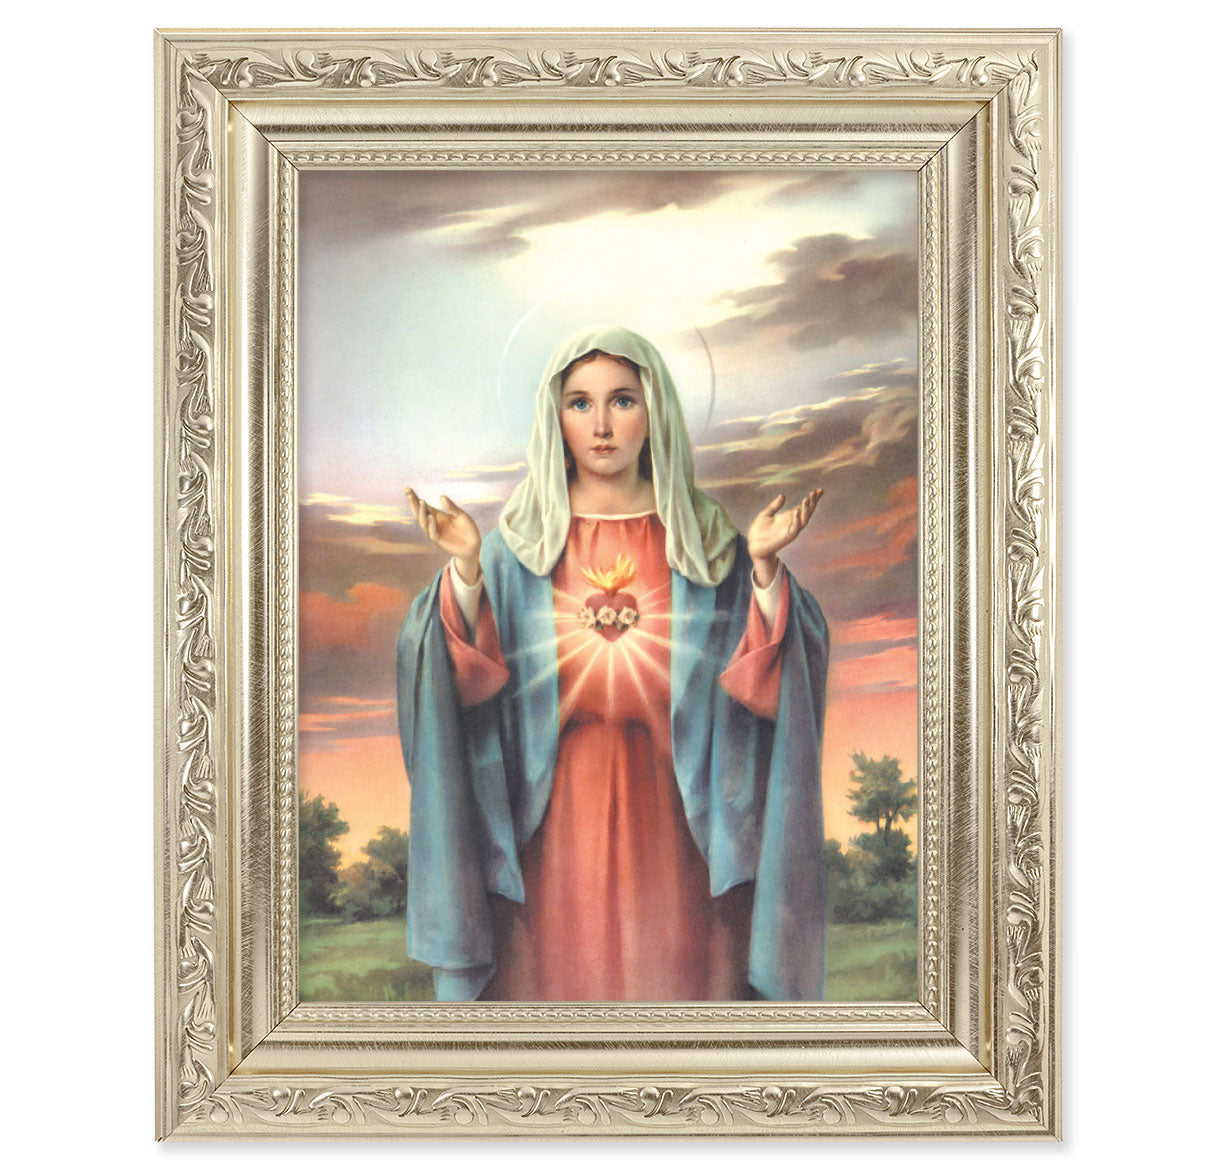 Immaculate Heart of Mary Silver Framed Art